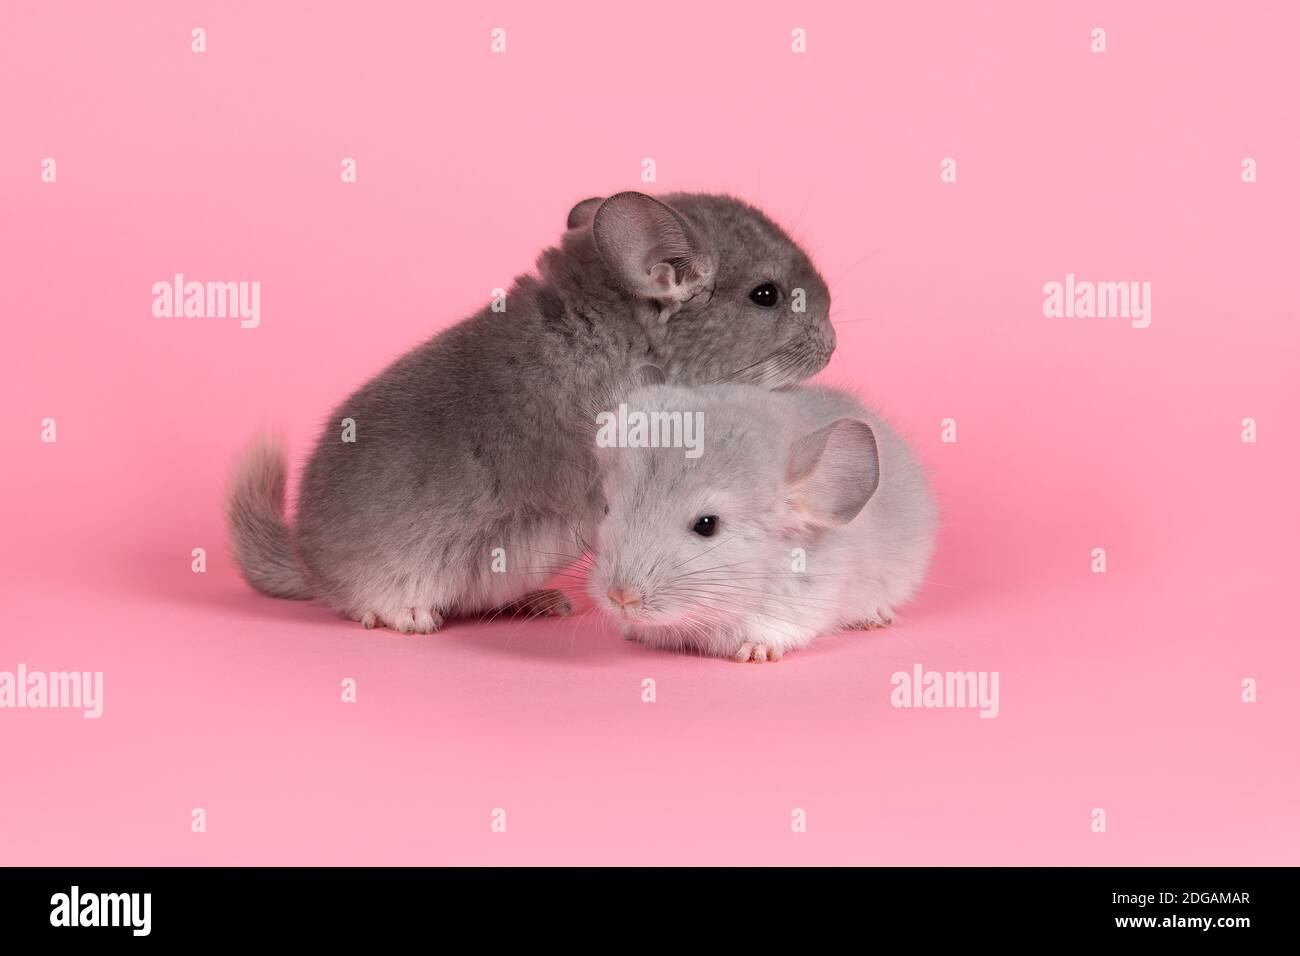 Two cute gray baby chinchillas together on a pink background Stock Photo